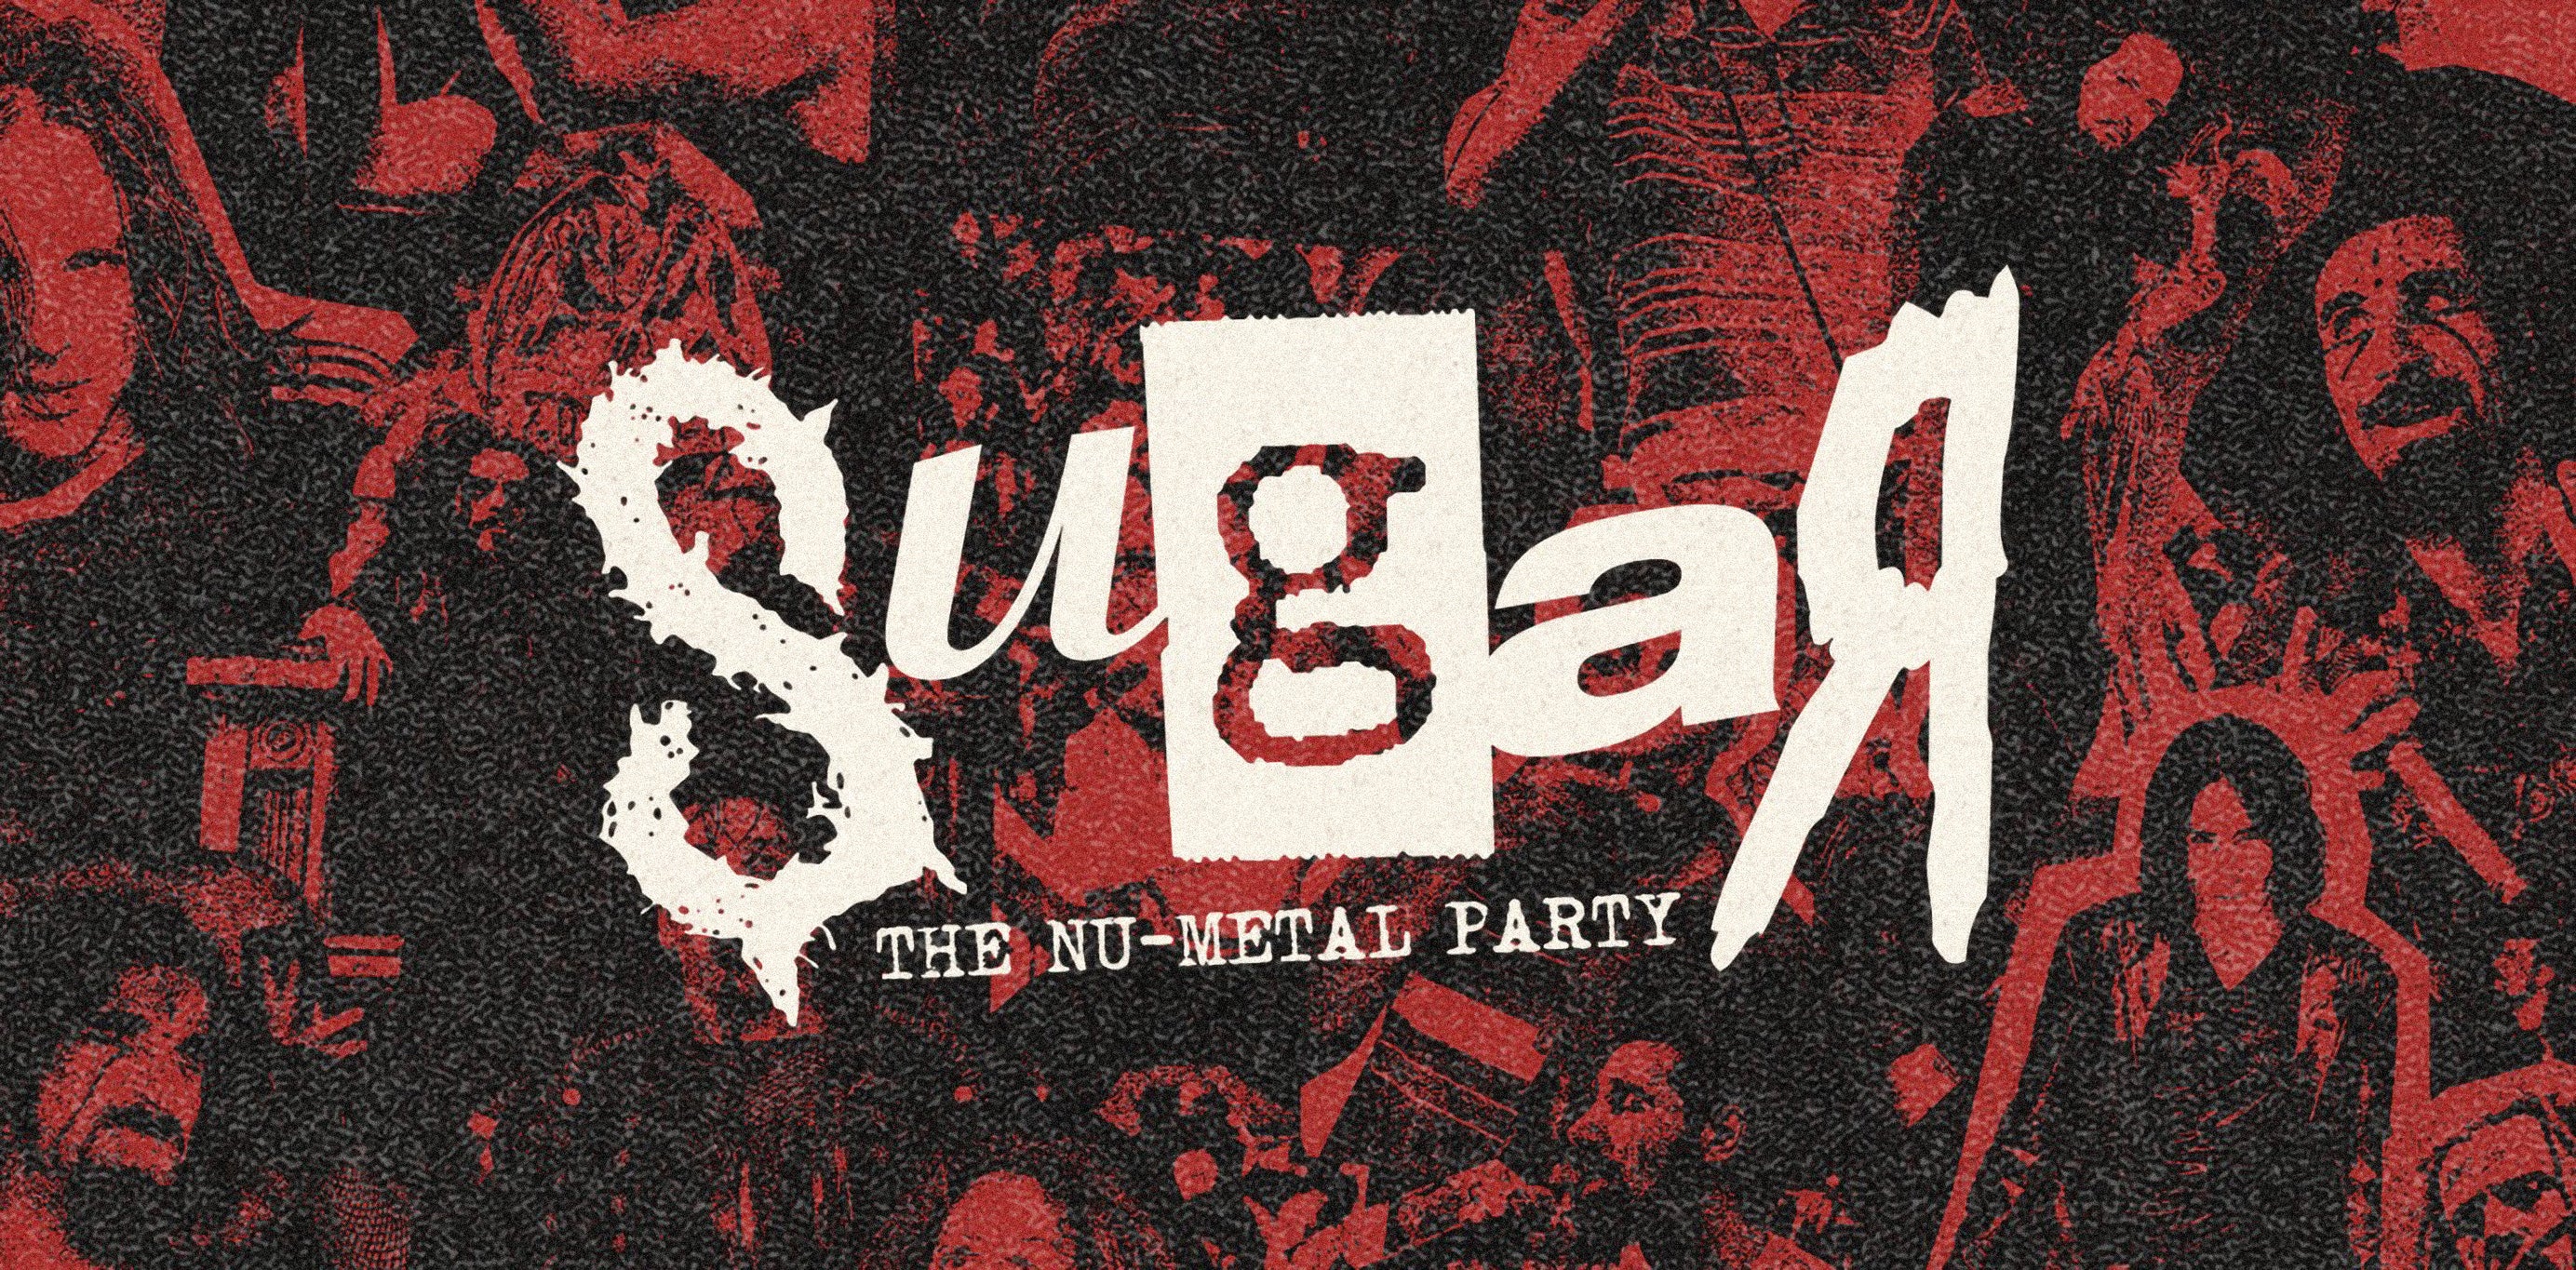 Sugar: The Nu-Metal Party - Ages 18+